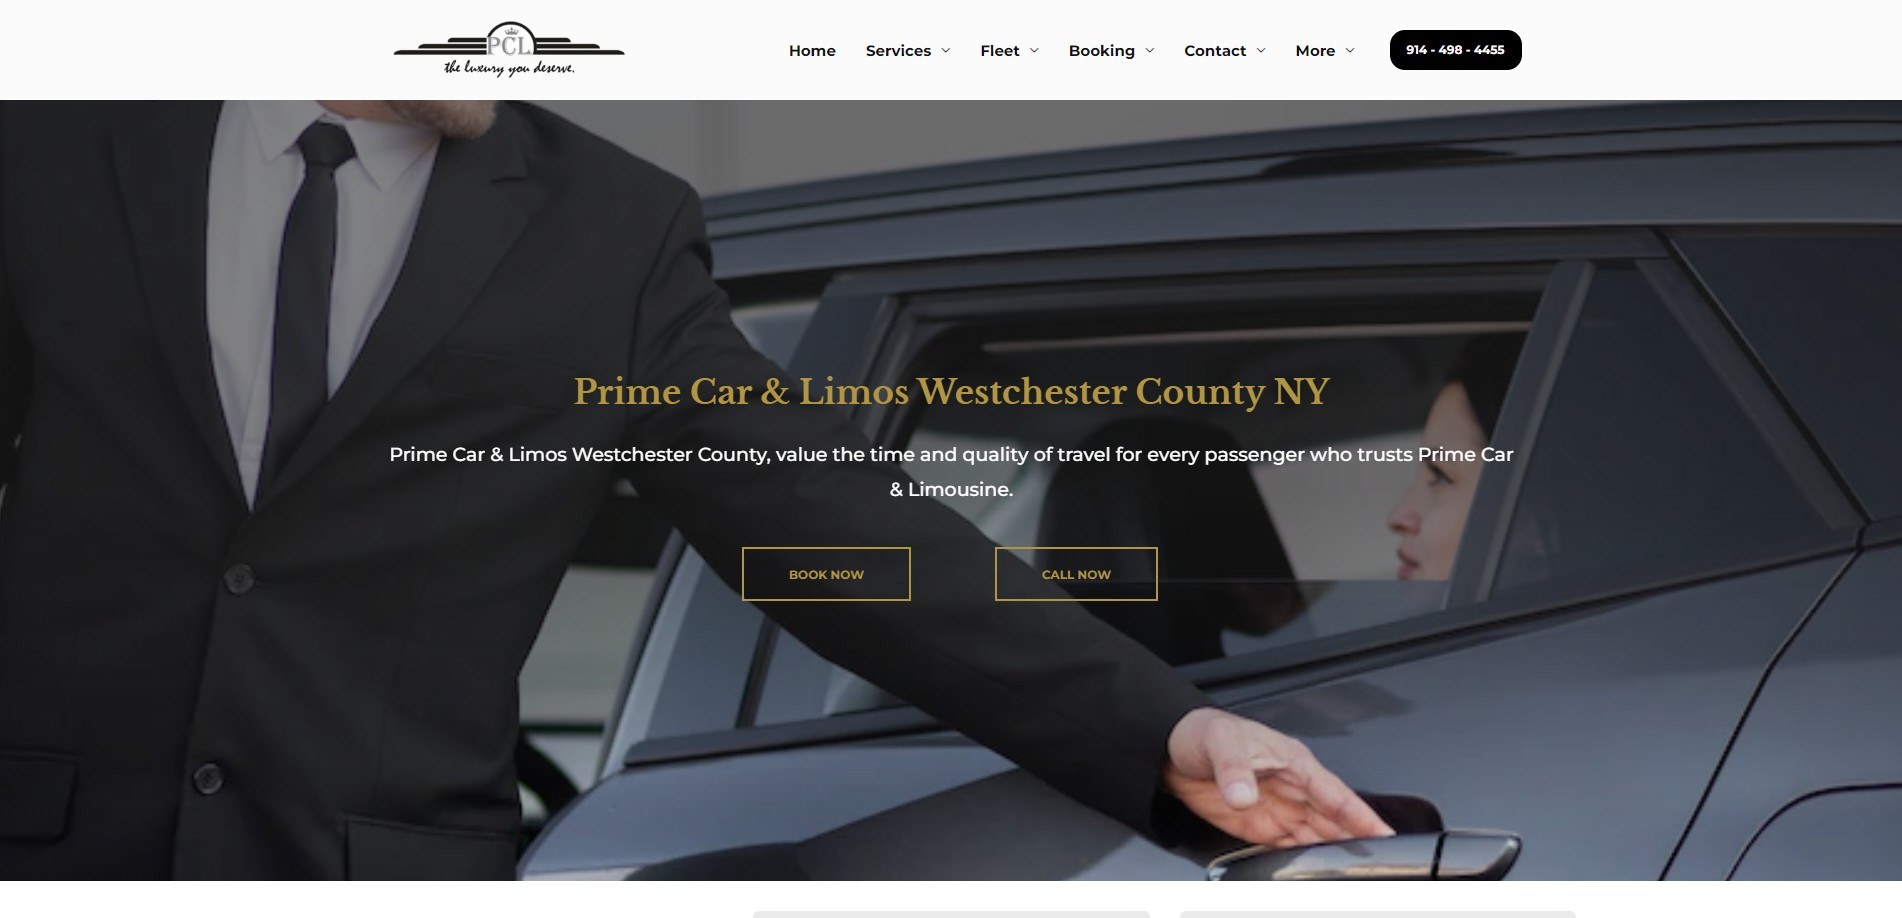 Prime Car & Limos Westchester County NY | Luxury Transportation